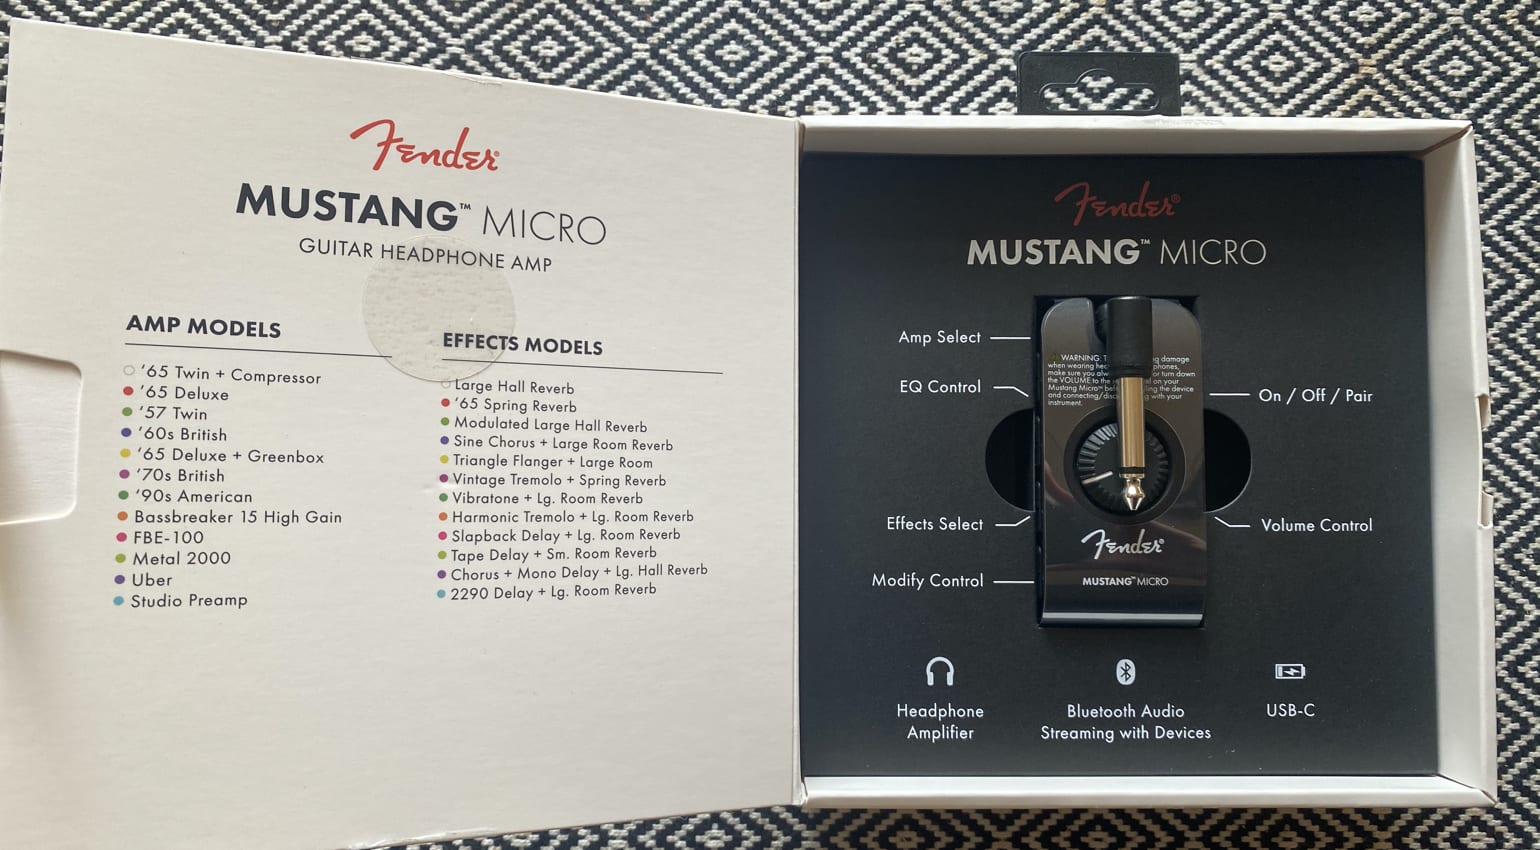 First Look Review: Plug in and go with Fender's Mustang Micro headphone amp  - gearnews.com